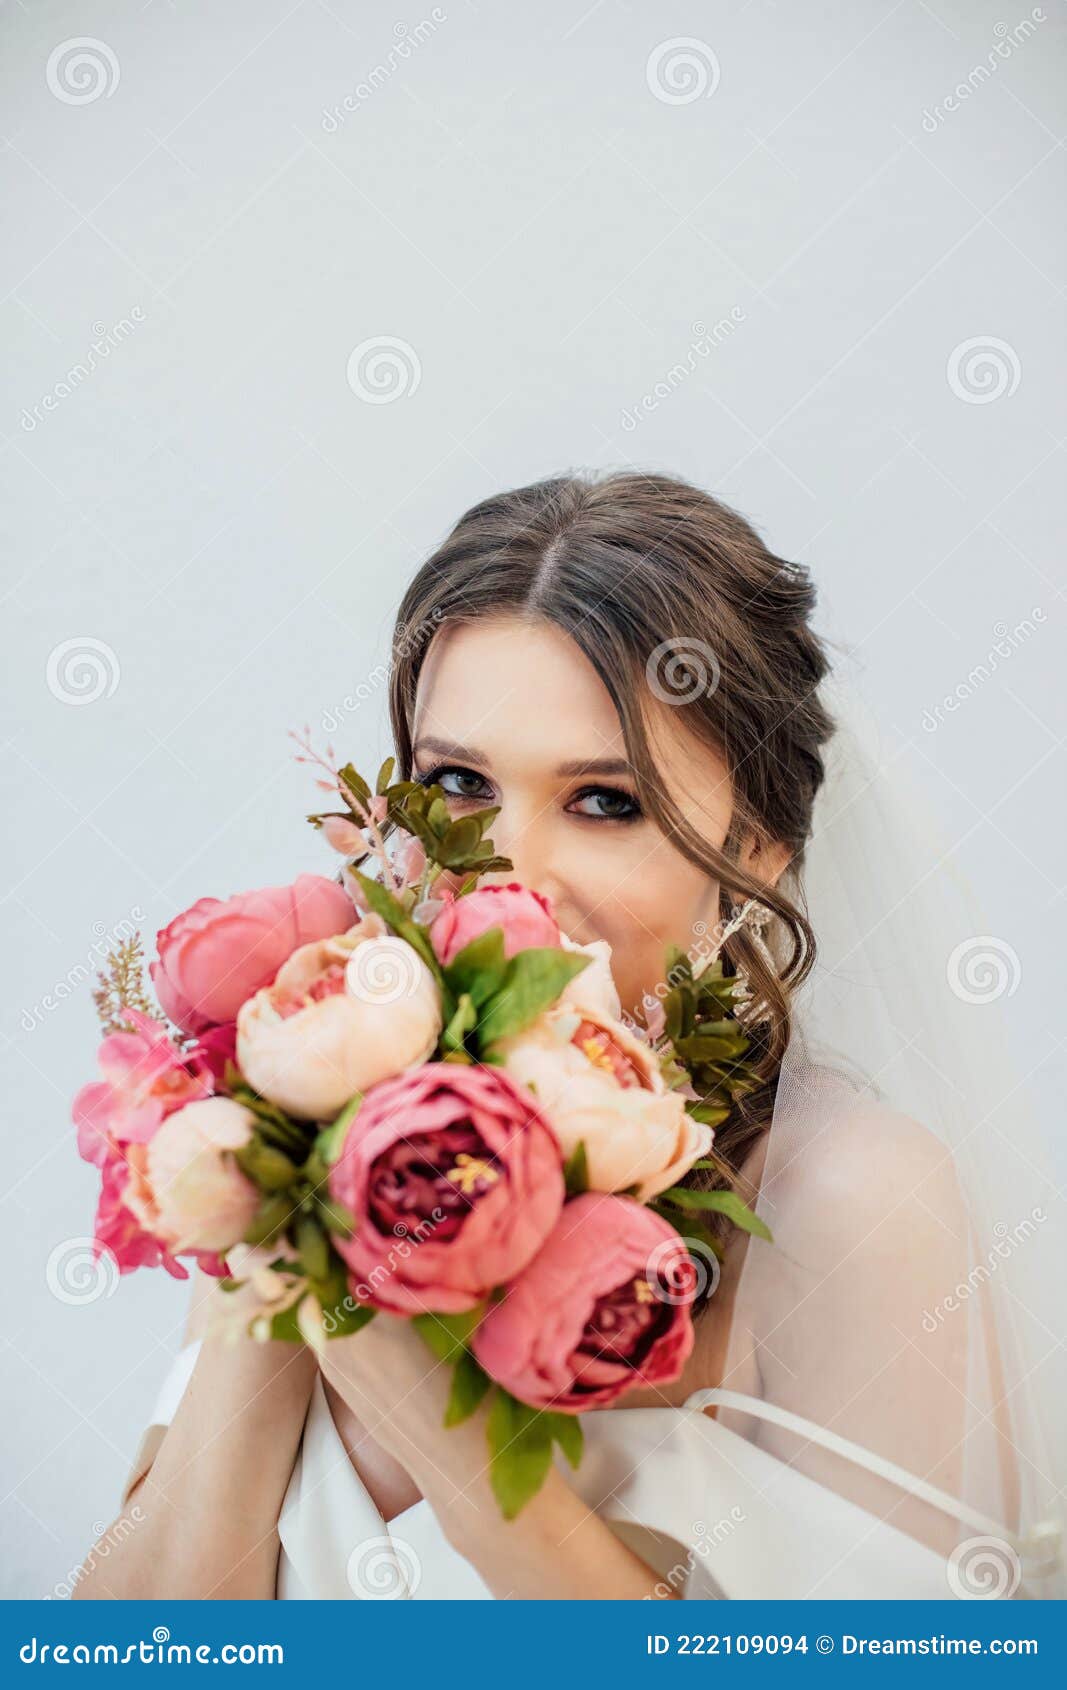 brunette girl in a wedding dress. bride in a white dress with a bouquet in her hands. makeup.